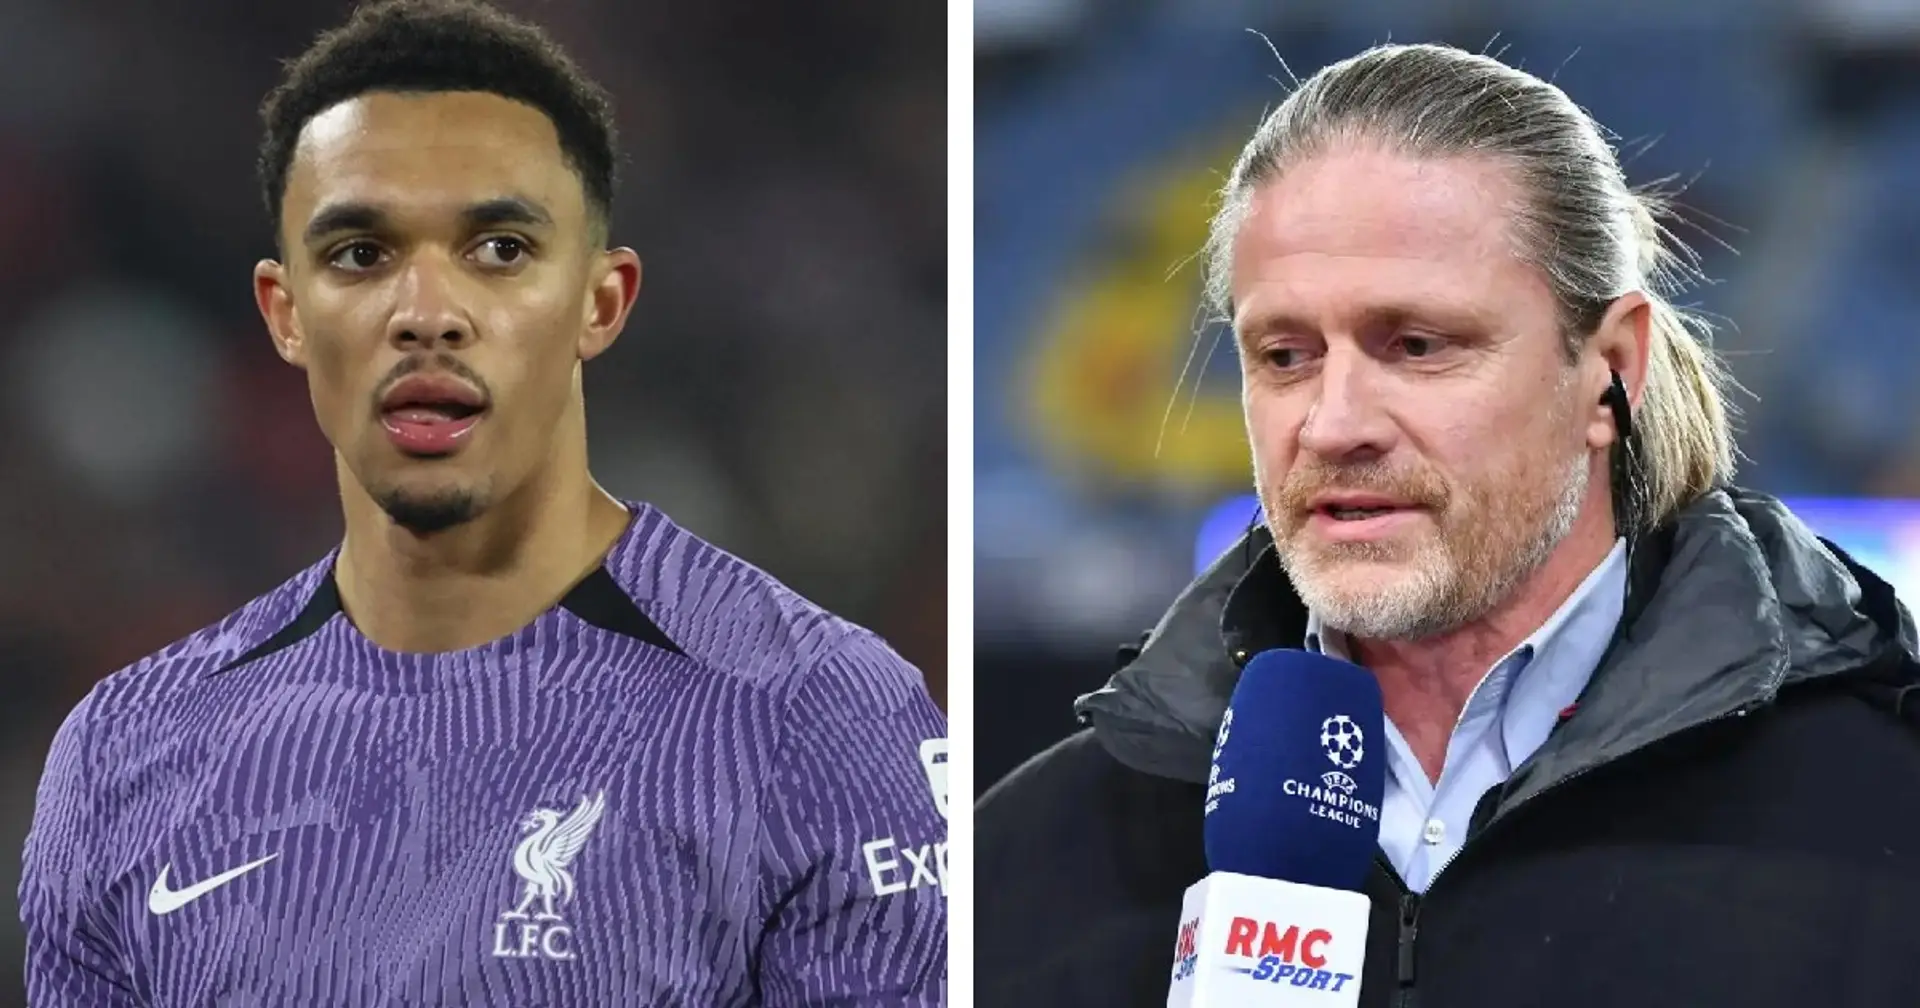 Premier League winner who moved to Real Madrid advises Trent against move